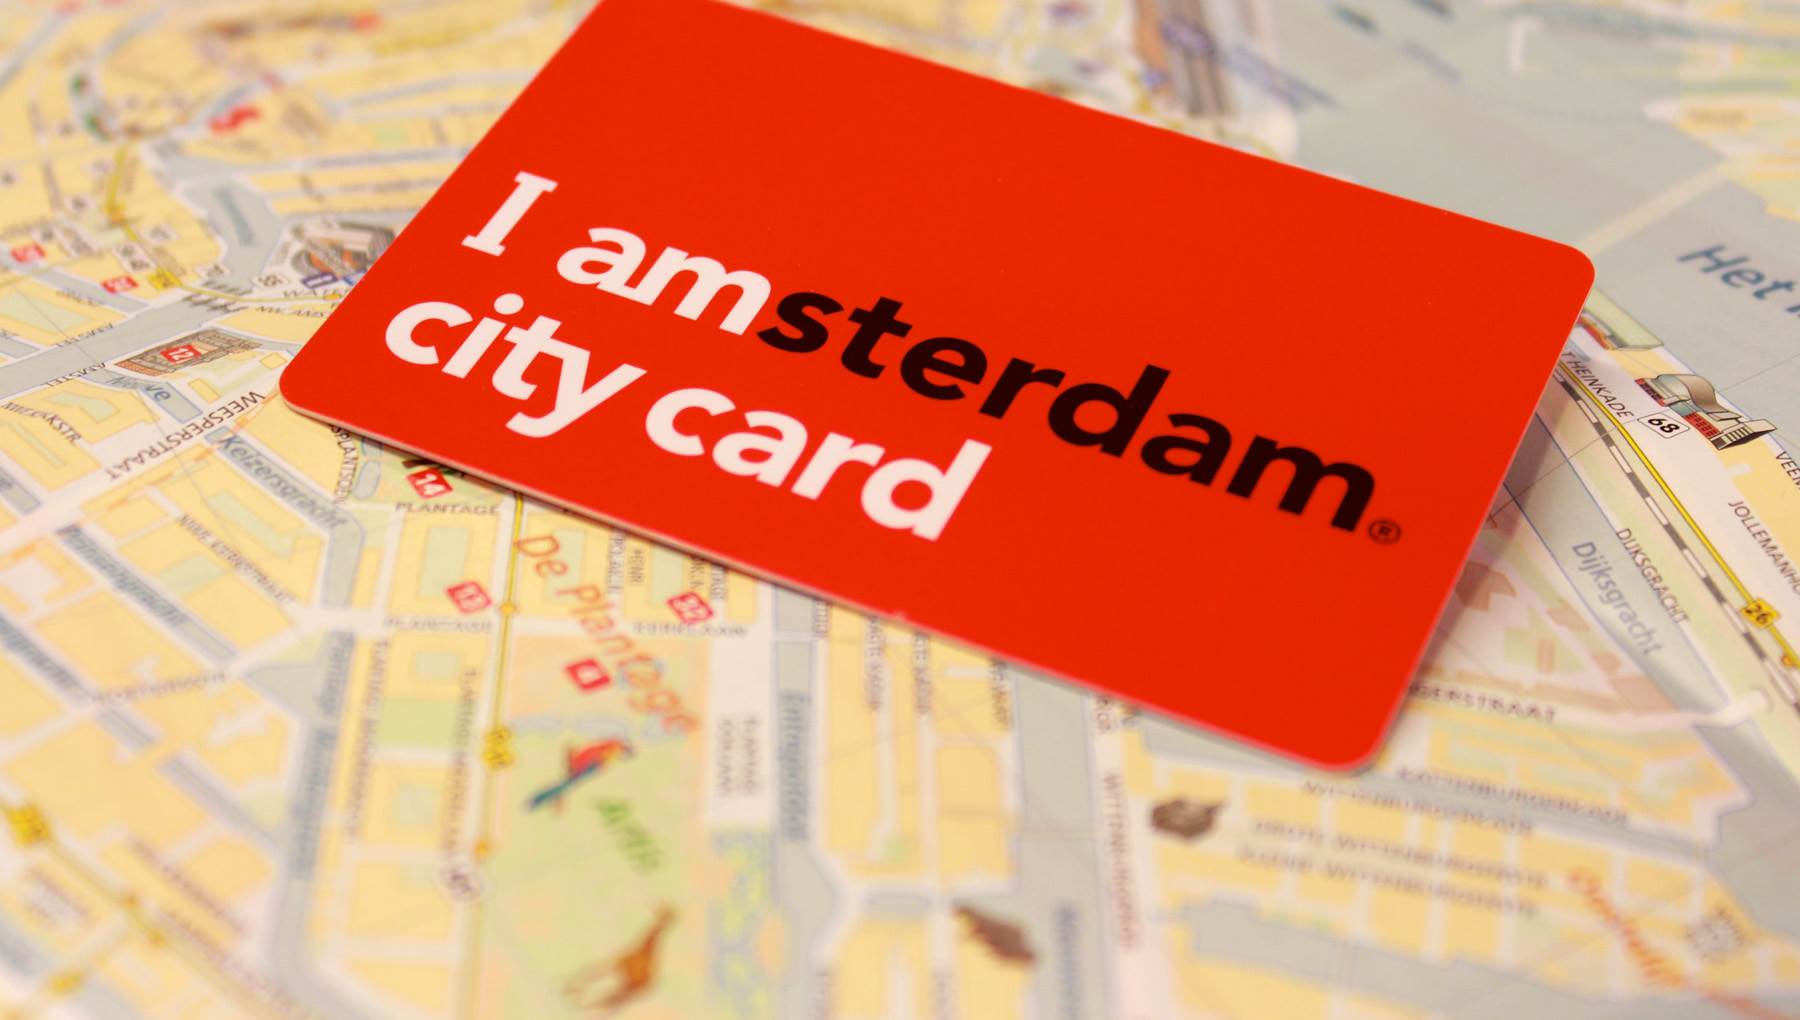 I Amsterdam City Card | The Good, Bad &#038; Everything In Between